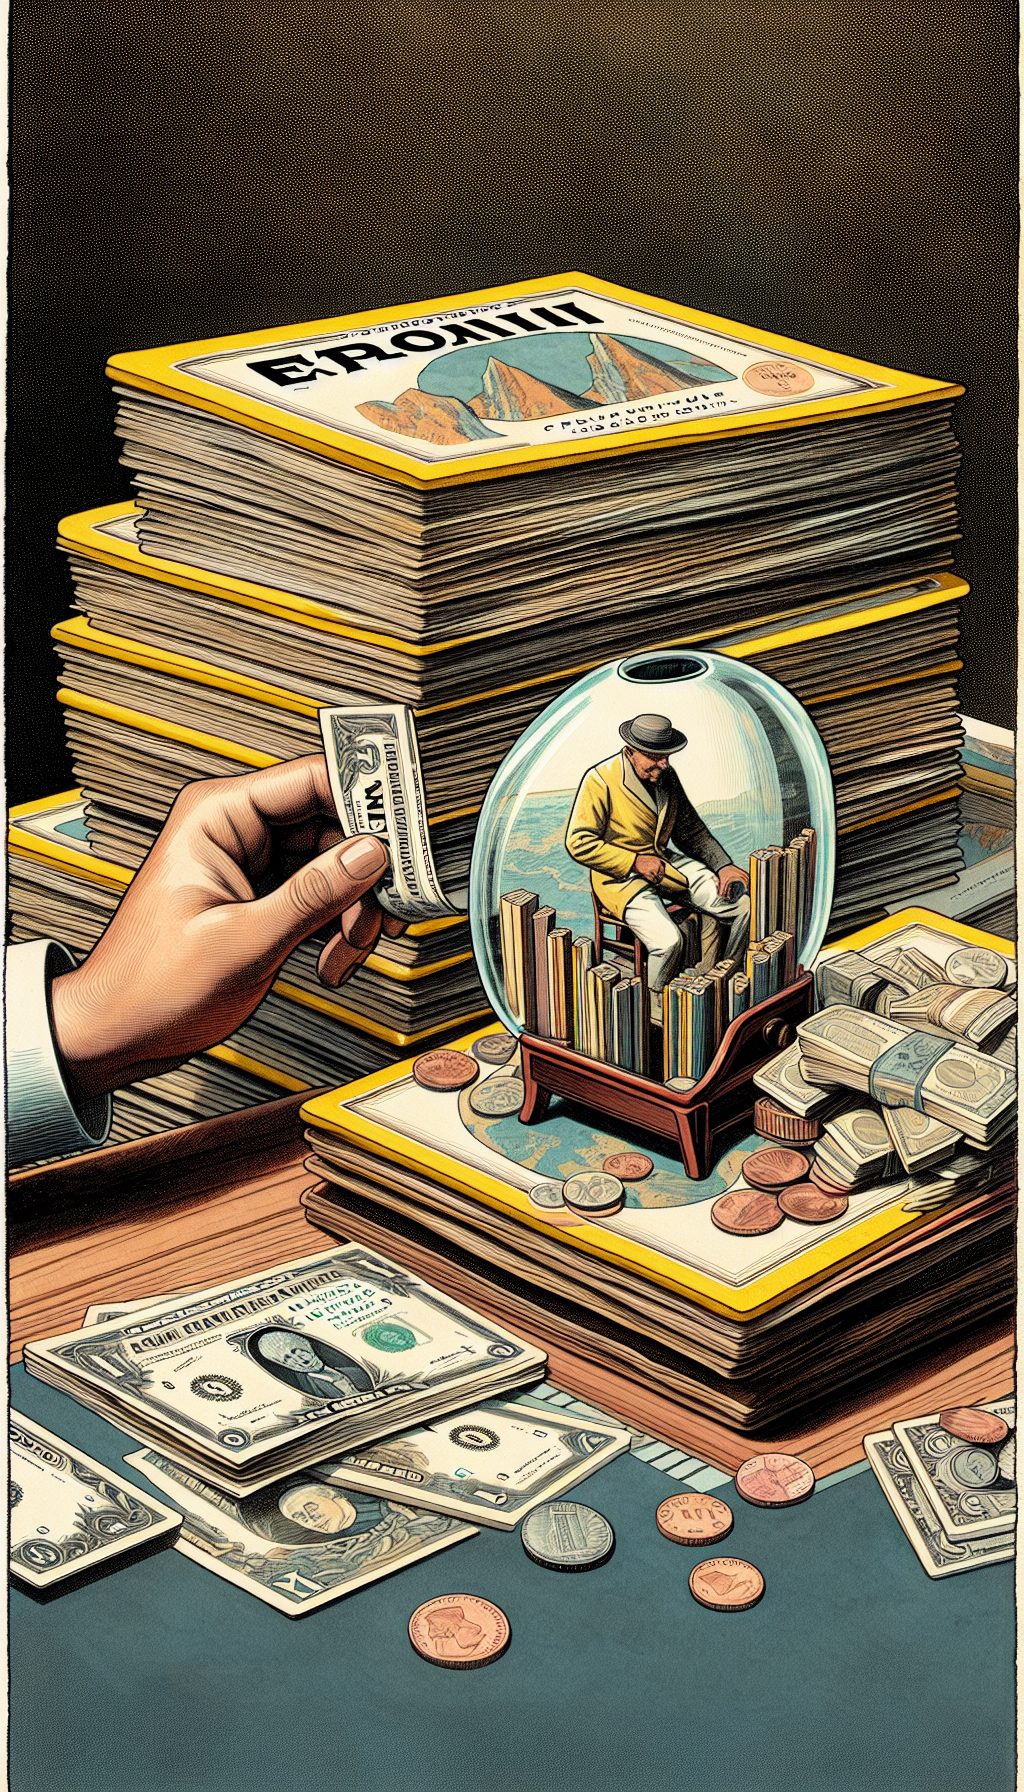 An illustration featuring a person sitting at an antique desk, surrounded by piles of National Geographic magazines. One hand delicately handles a preserved magazine, while the other drops coins and bills into a translucent piggy bank shaped like the magazine's iconic yellow border. The image is richly detailed in a watercolor style, with crisp line art accentuating the magazines and currency.